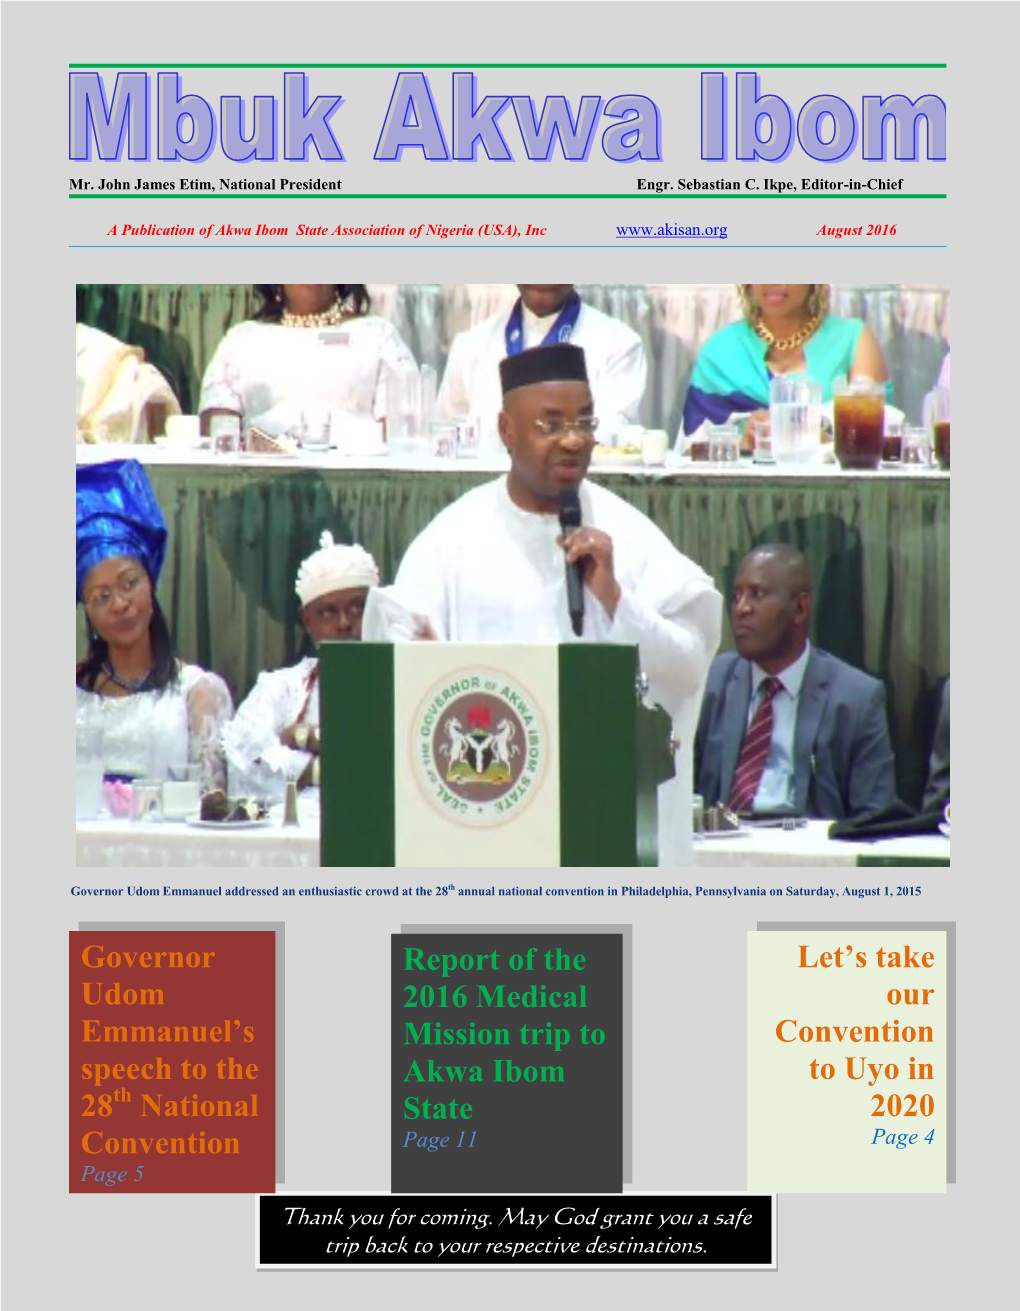 Mbuk Akwa Ibom - August 2015 to August 2016 Page 2